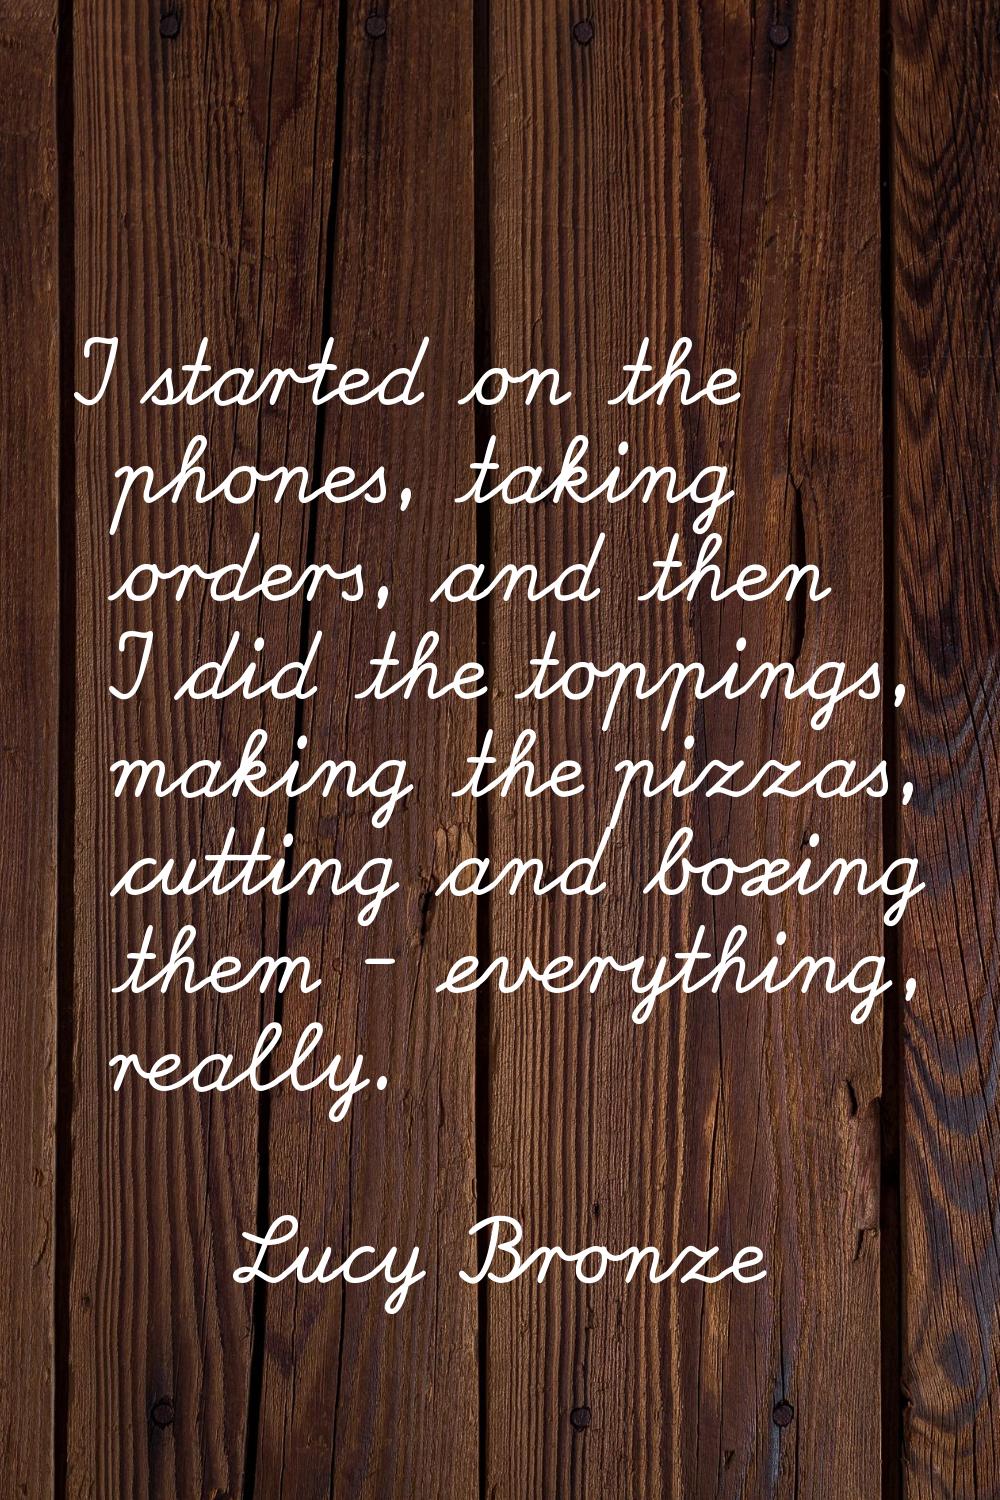 I started on the phones, taking orders, and then I did the toppings, making the pizzas, cutting and